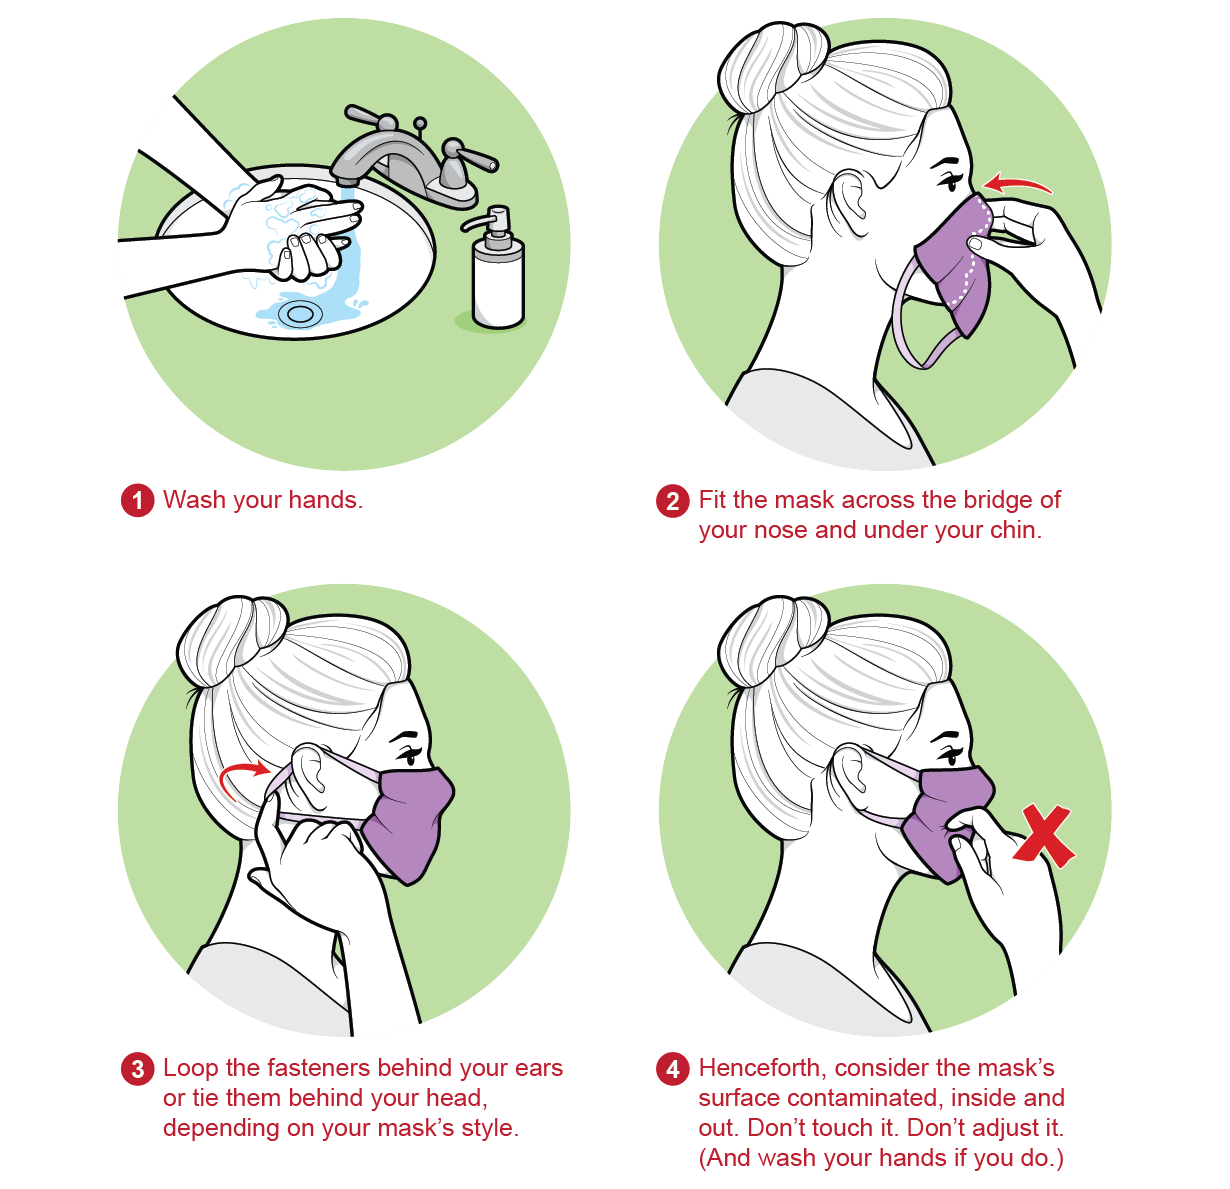 How To Use Masks During The Coronavirus Pandemic Scientific American